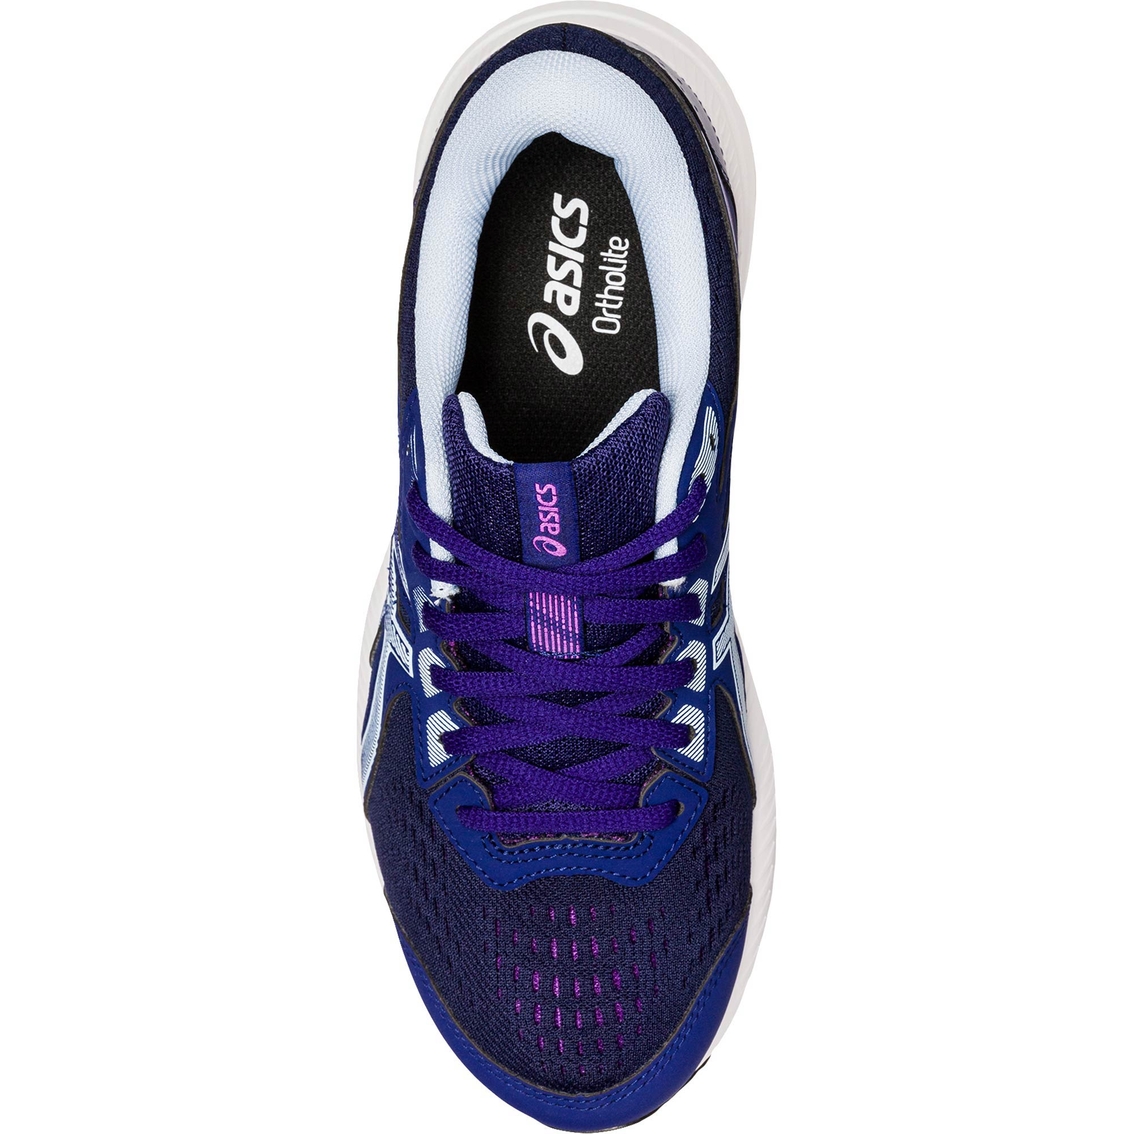 Asics Women's Gel Contend 8 Running Shoes | Women's Athletic Shoes ...